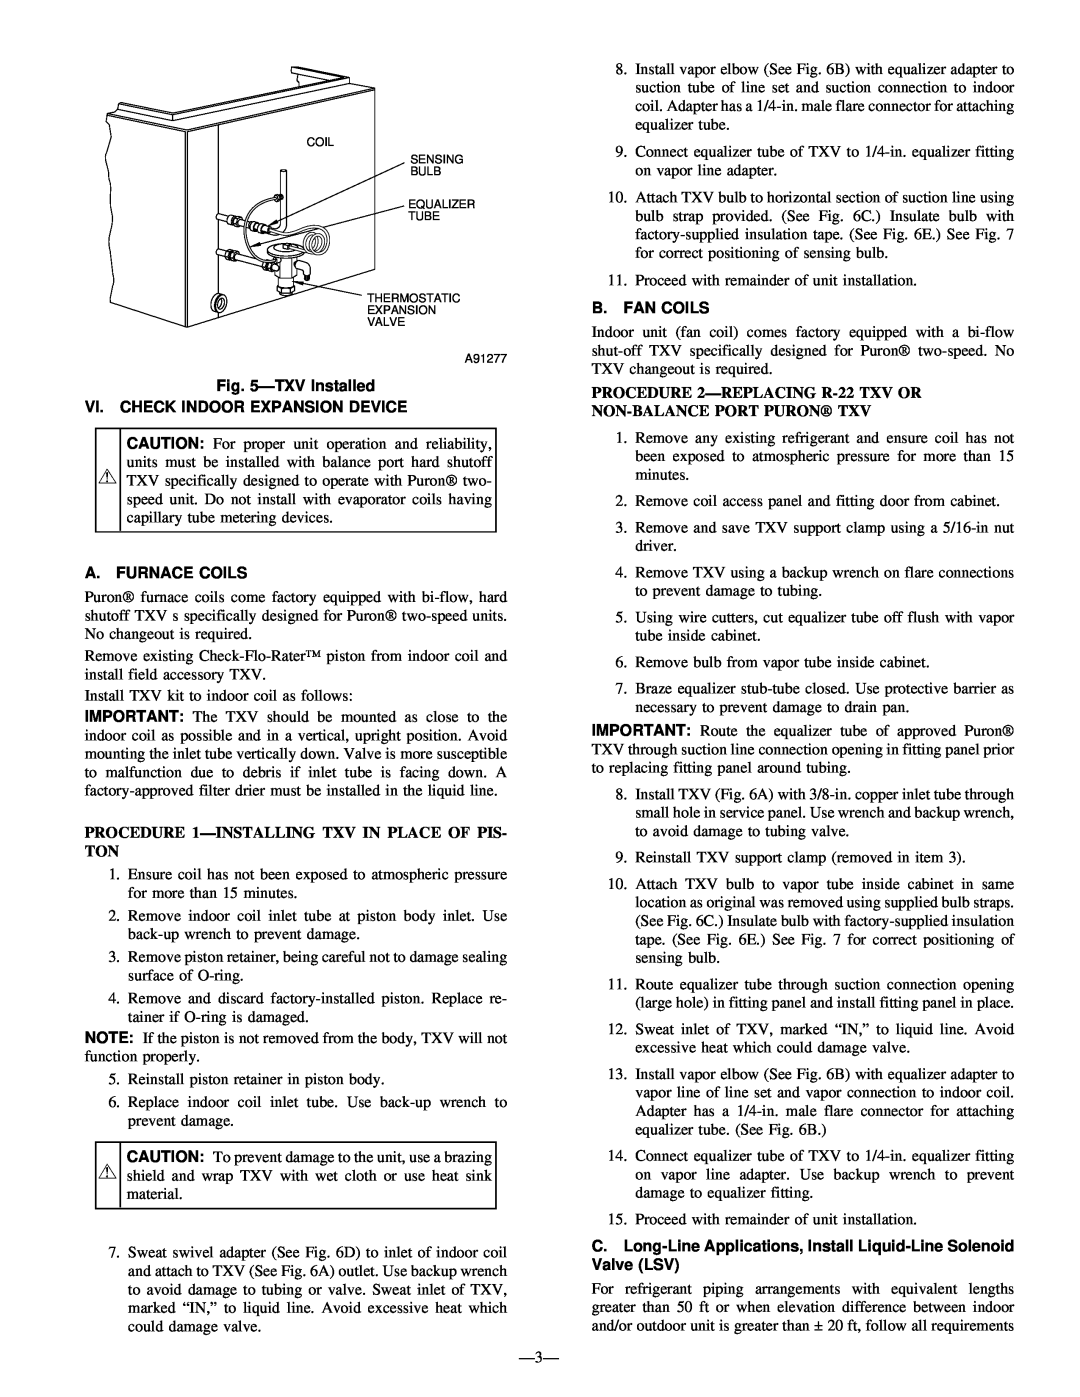 Bryant 698B instruction manual TXVInstalled, Vi. Check Indoor Expansion Device, A. Furnace Coils, B. Fan Coils 